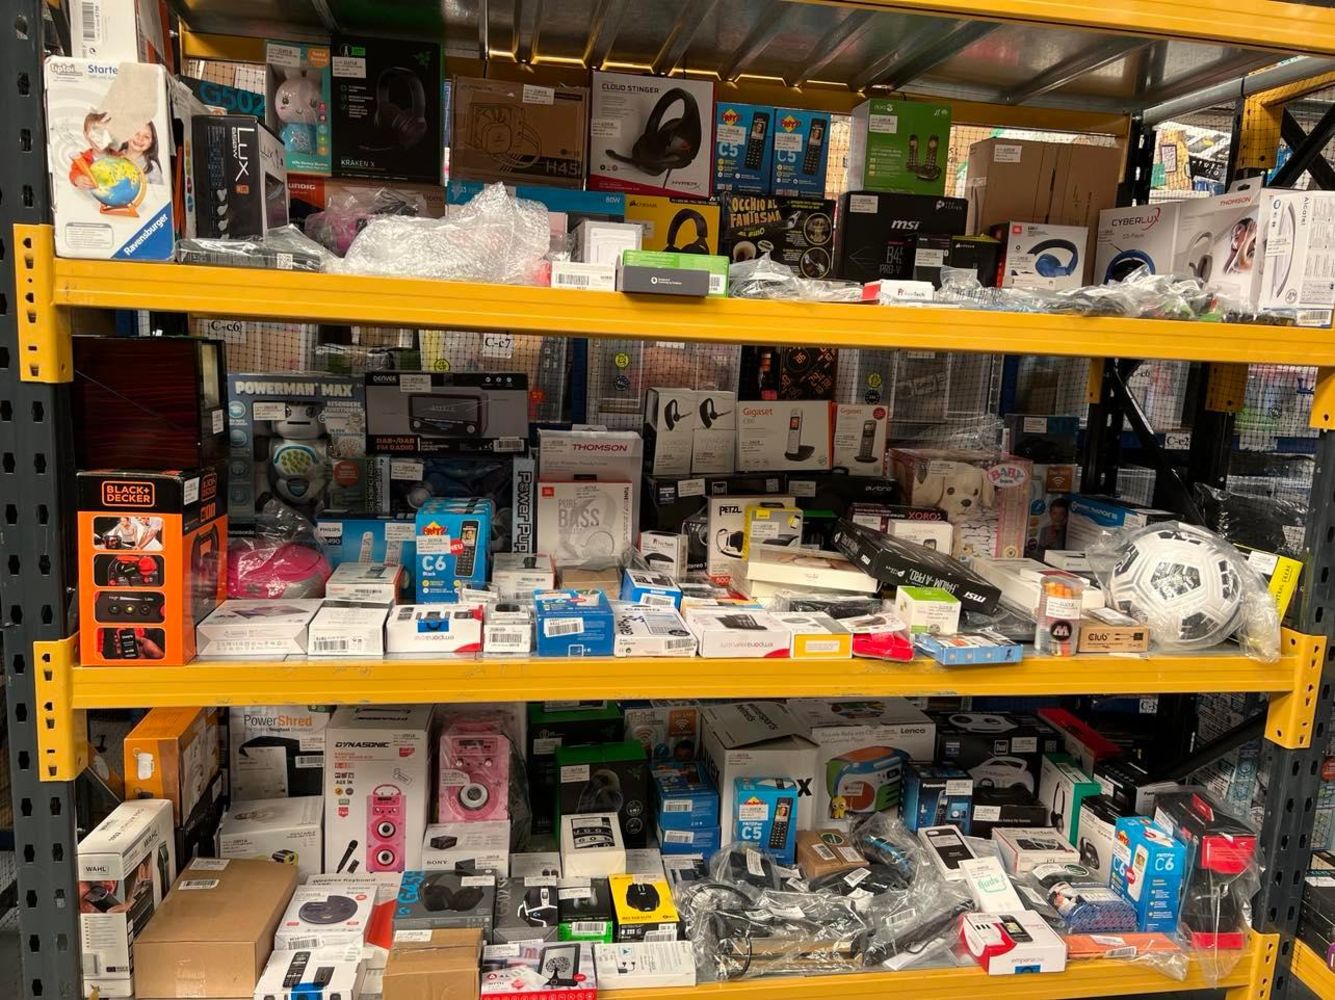 Up to 90% Discounted!Appraisal available ! Brother, Gigaset, Samsung, Bosch, Philips, Apple, Roccat!Phones, Headsets, Printers, Keyboard, Mouse!